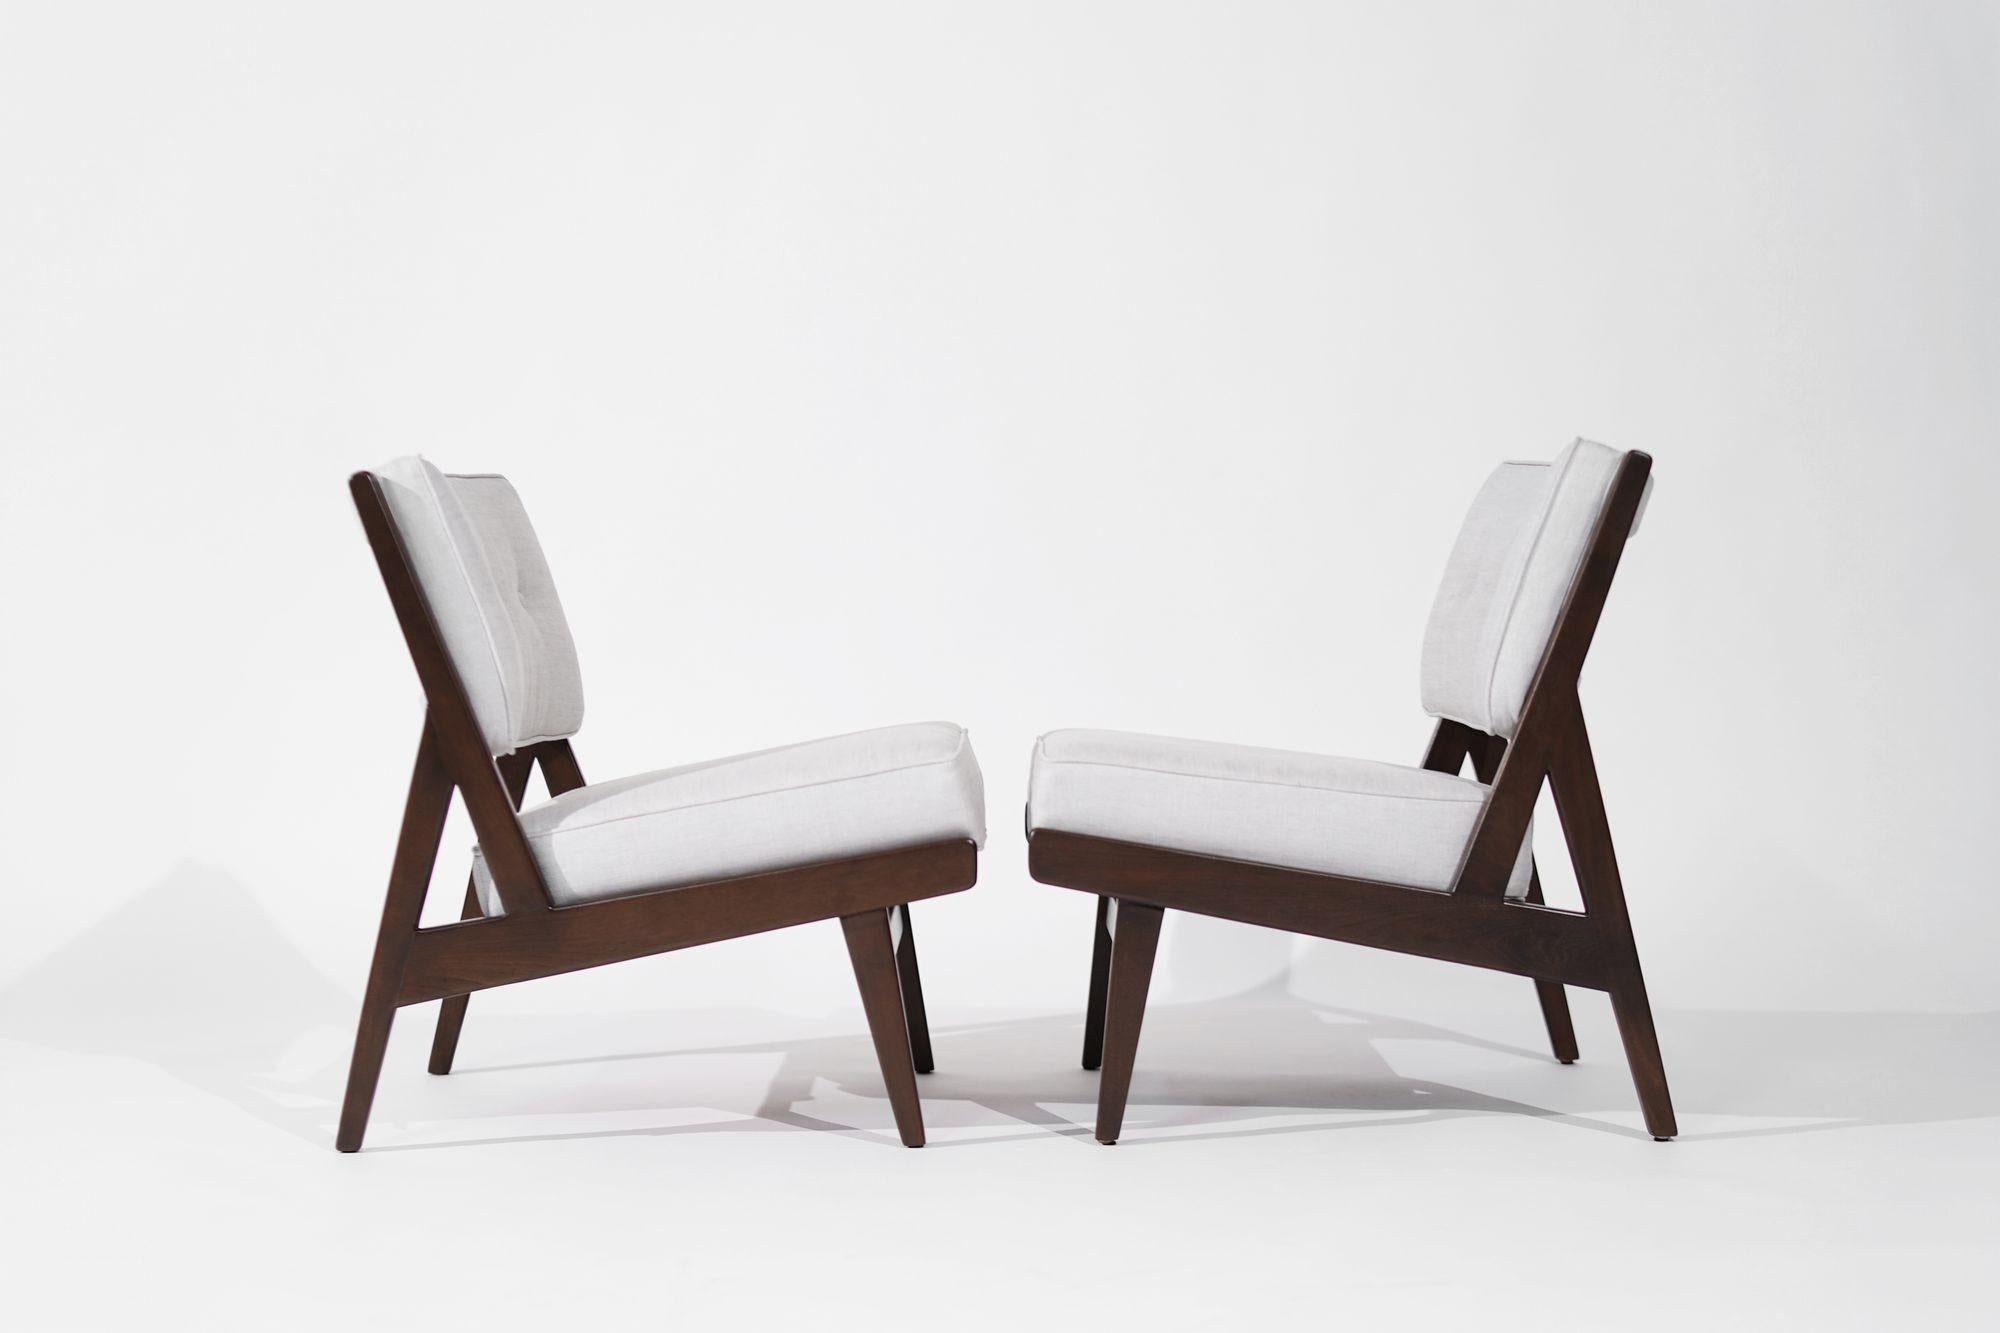 Experience the epitome of mid-century modern elegance with our fully restored walnut slipper chairs from the 1950s, a timeless creation by Jens Risom for Risom, Inc. Meticulously refurbished and reupholstered in luxurious Gray Linen, these chairs